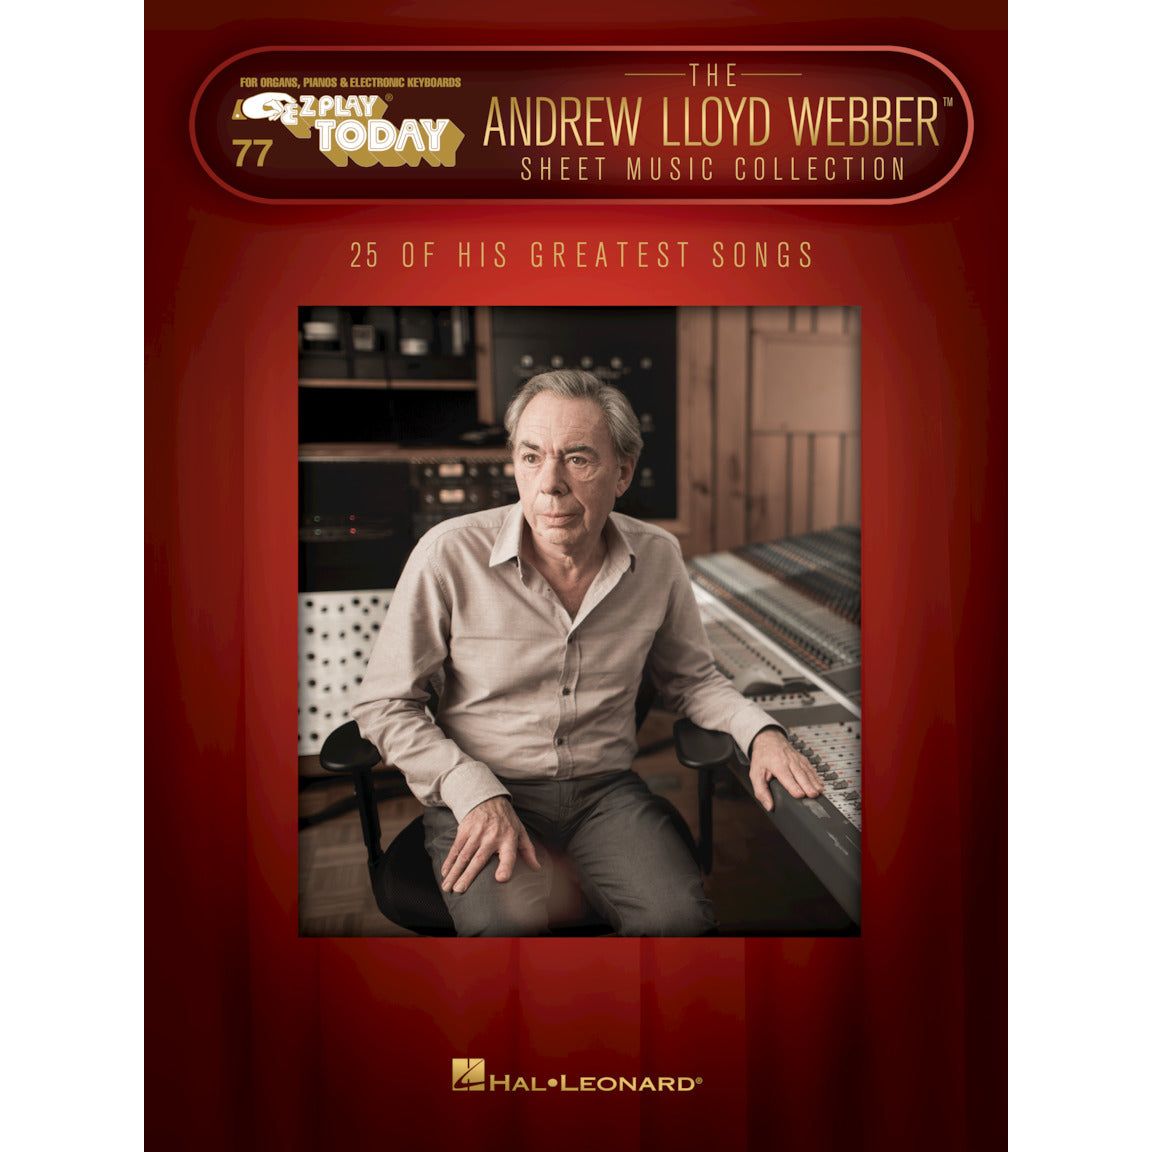 EZ Play 077 - The Andrew Lloyd Webber Sheet Music Collection